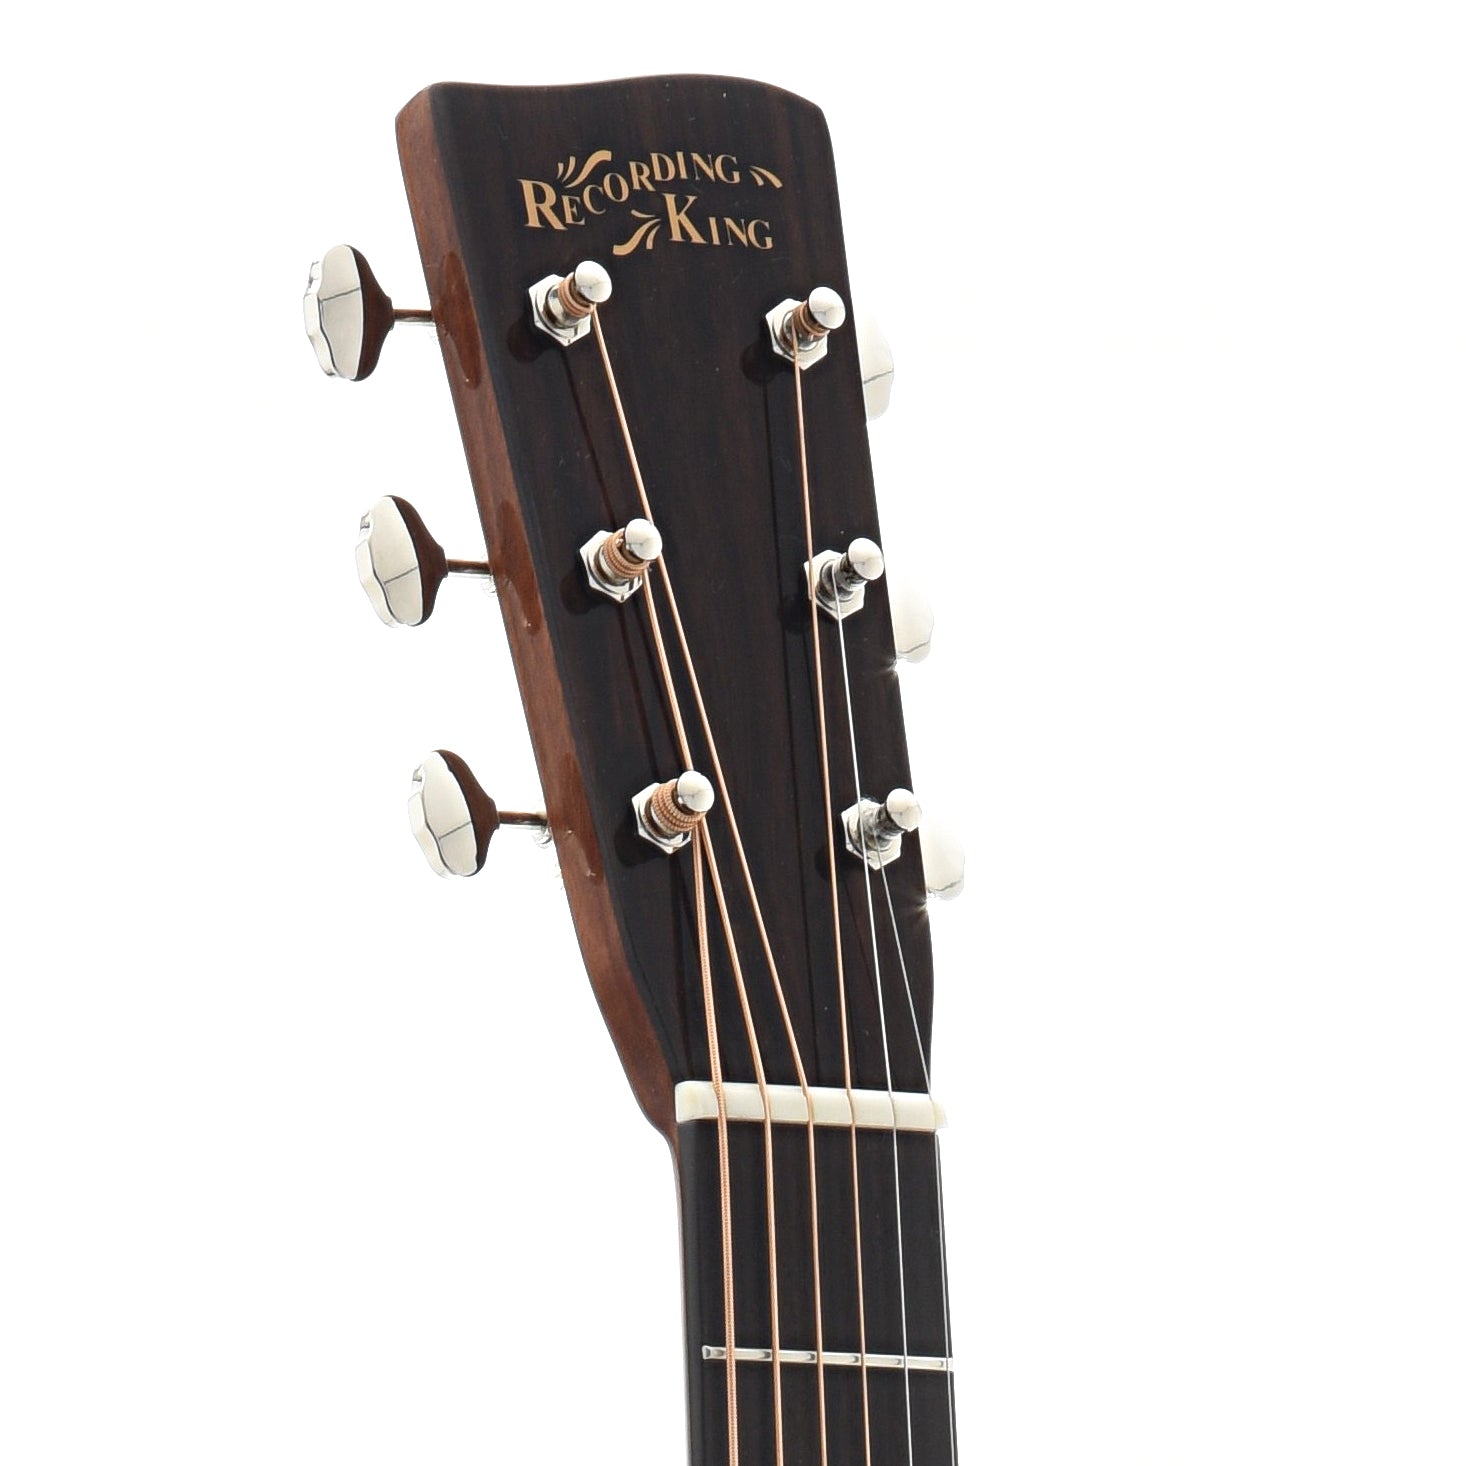 Recording King RO-318 Mahogany 000 Acoustic Guitar with Deluxe Adirond